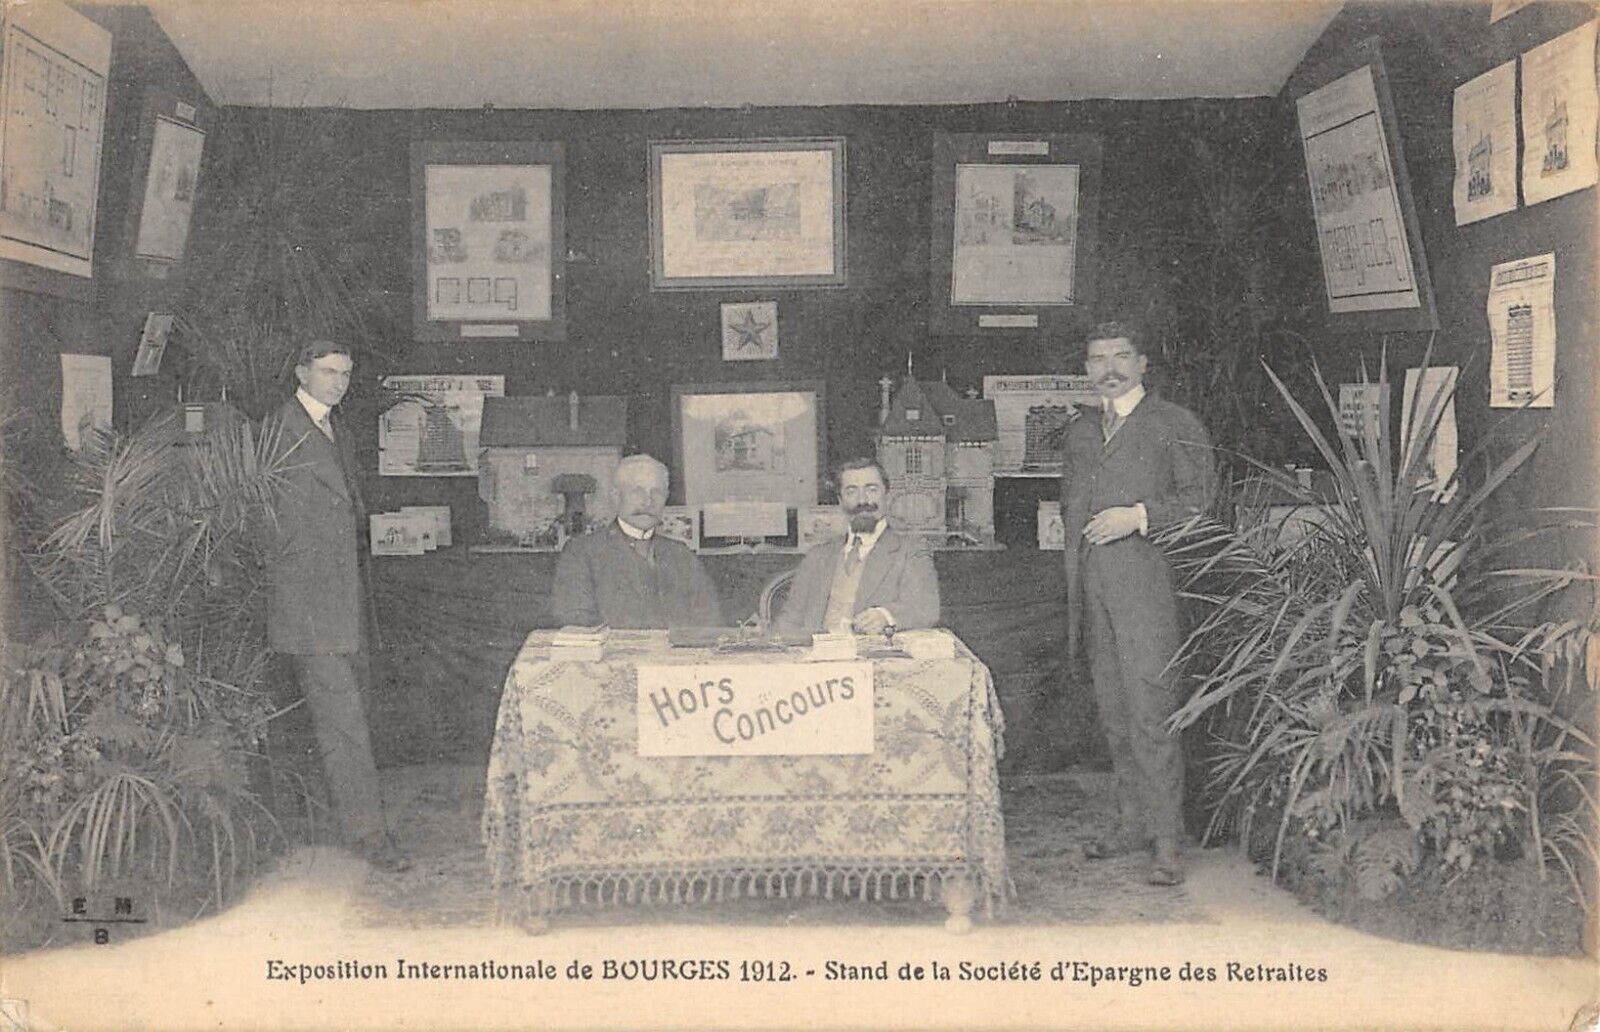 CPA 18 INTERNATIONAL EXHIBITION OF BOURGES 1912 / STAND OF THE SOCIETY OF SAVINGS